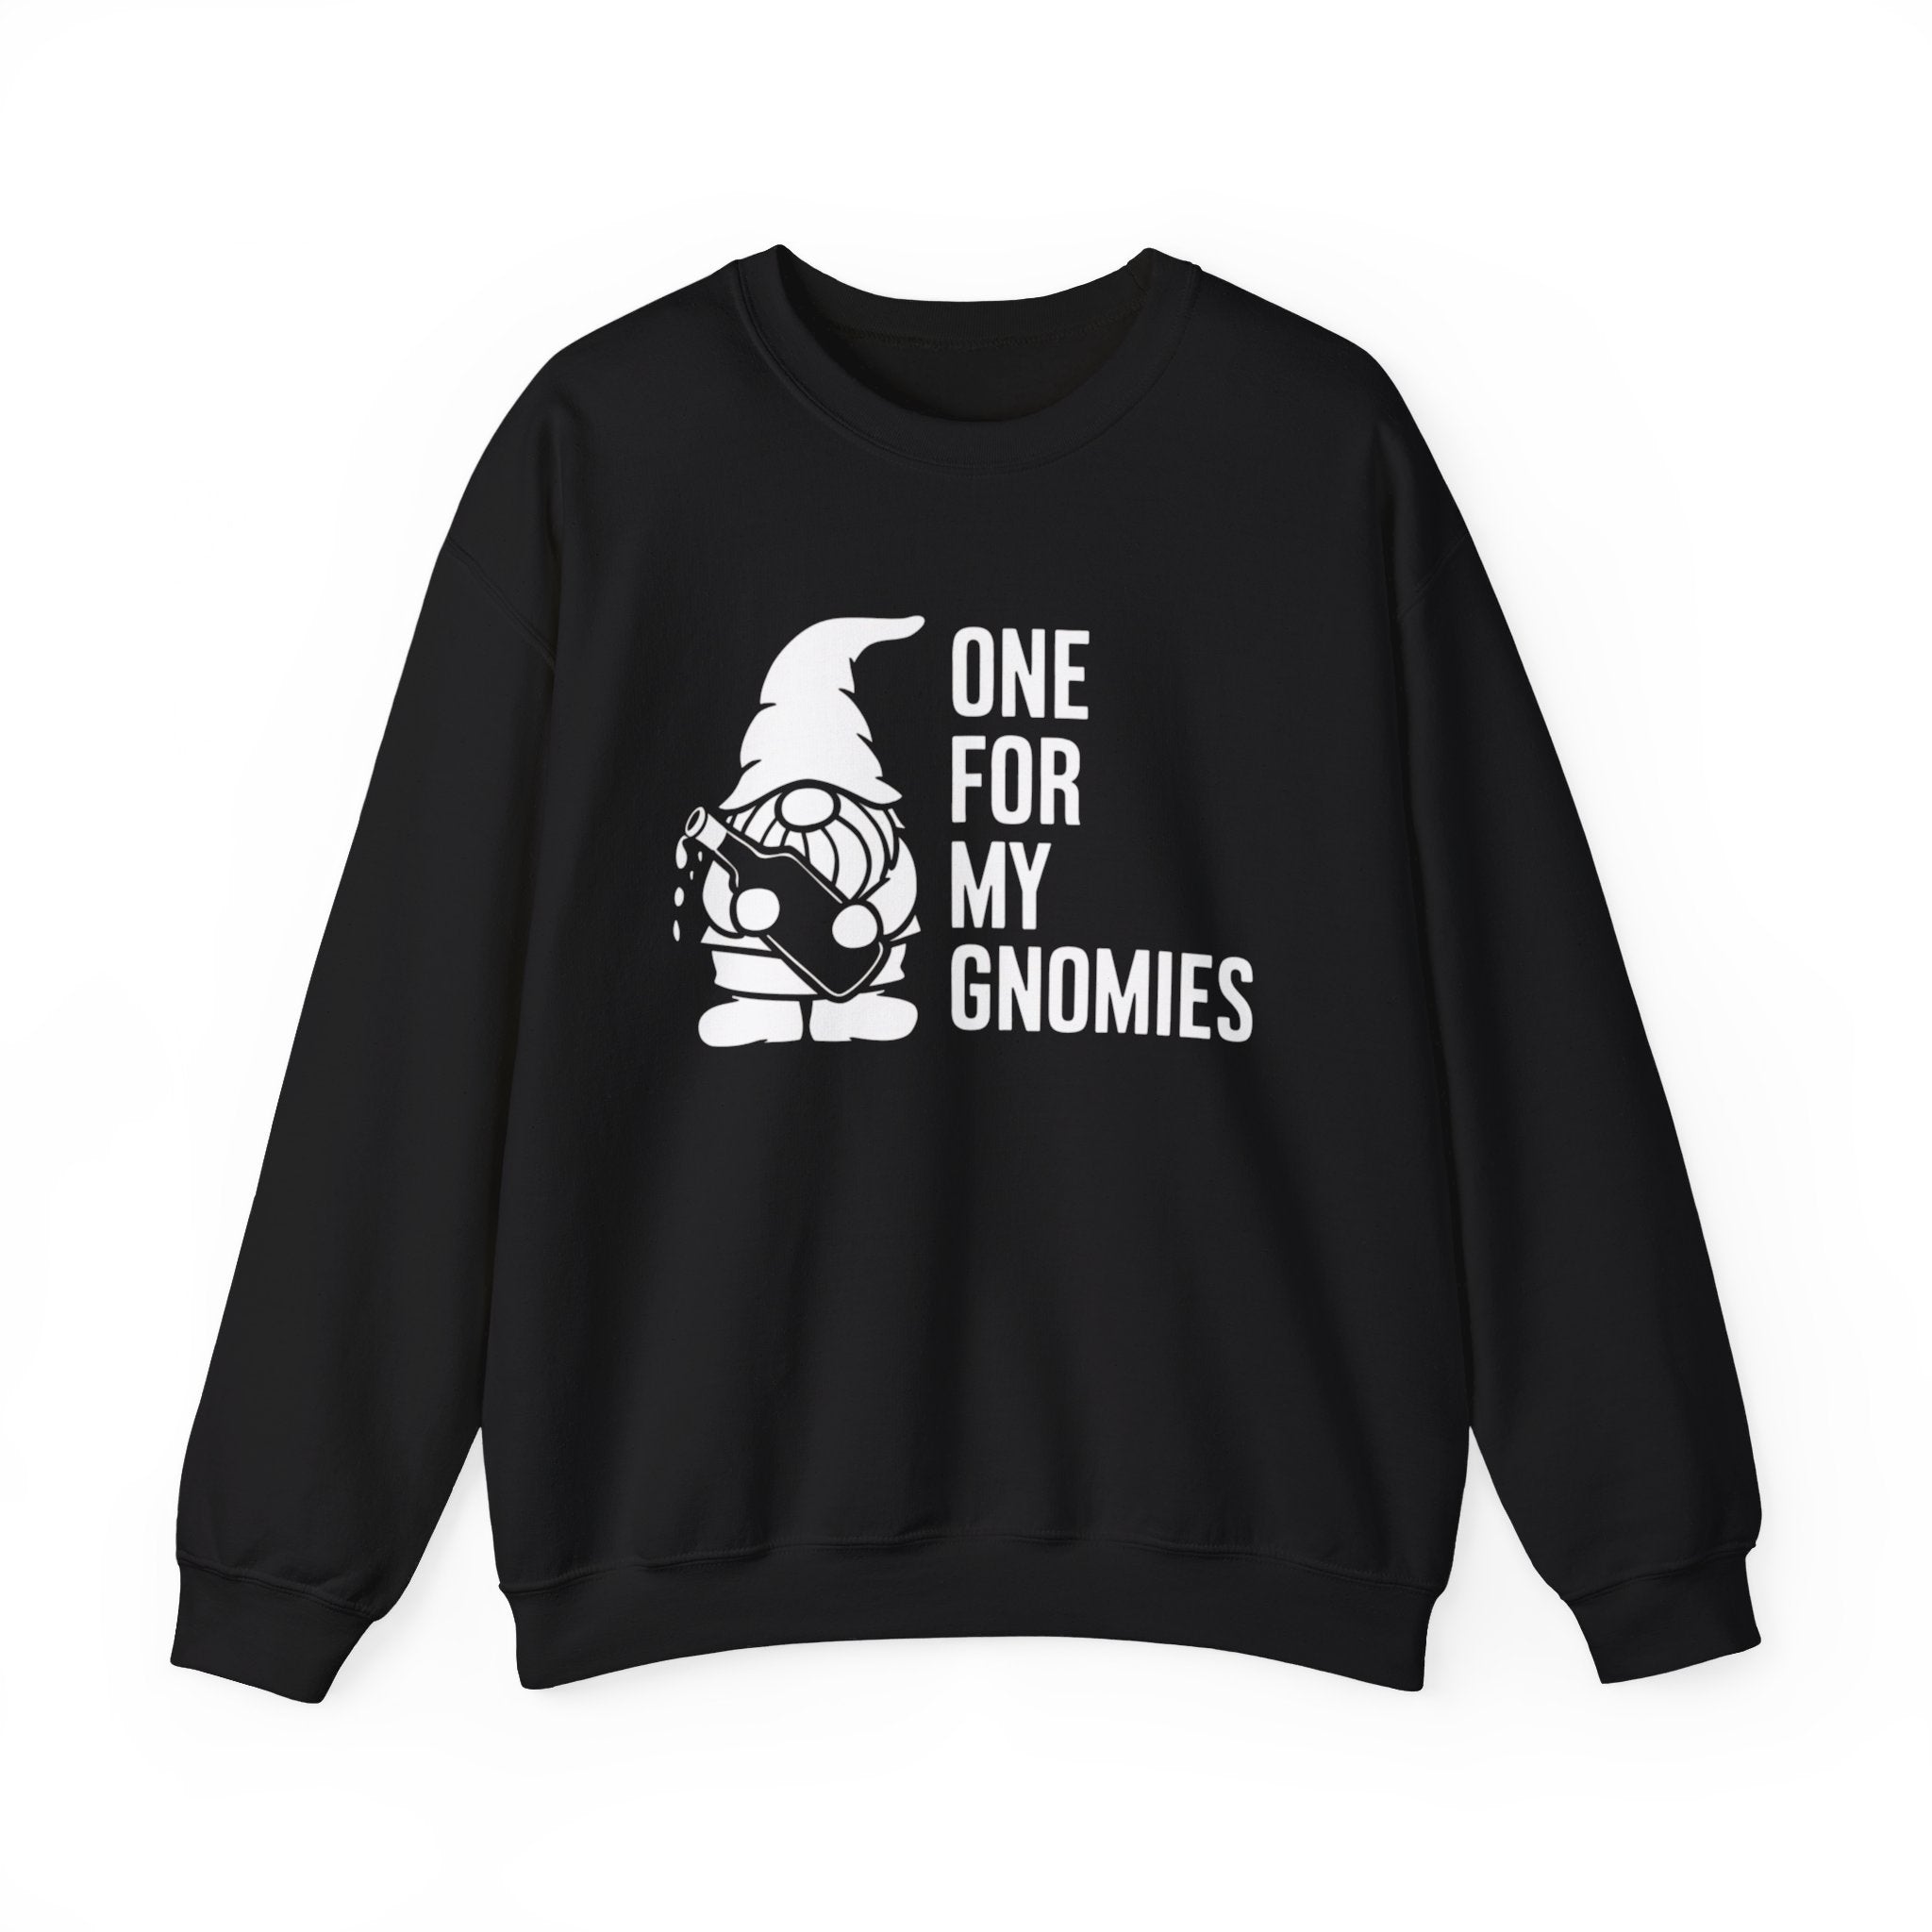 One For My Gnomies - Sweatshirt featuring a graphic of a gnome and the text "One for my Gnomies" on the front, perfect for the colder months. This supremely soft, warm sweatshirt will keep you cozy all season long.